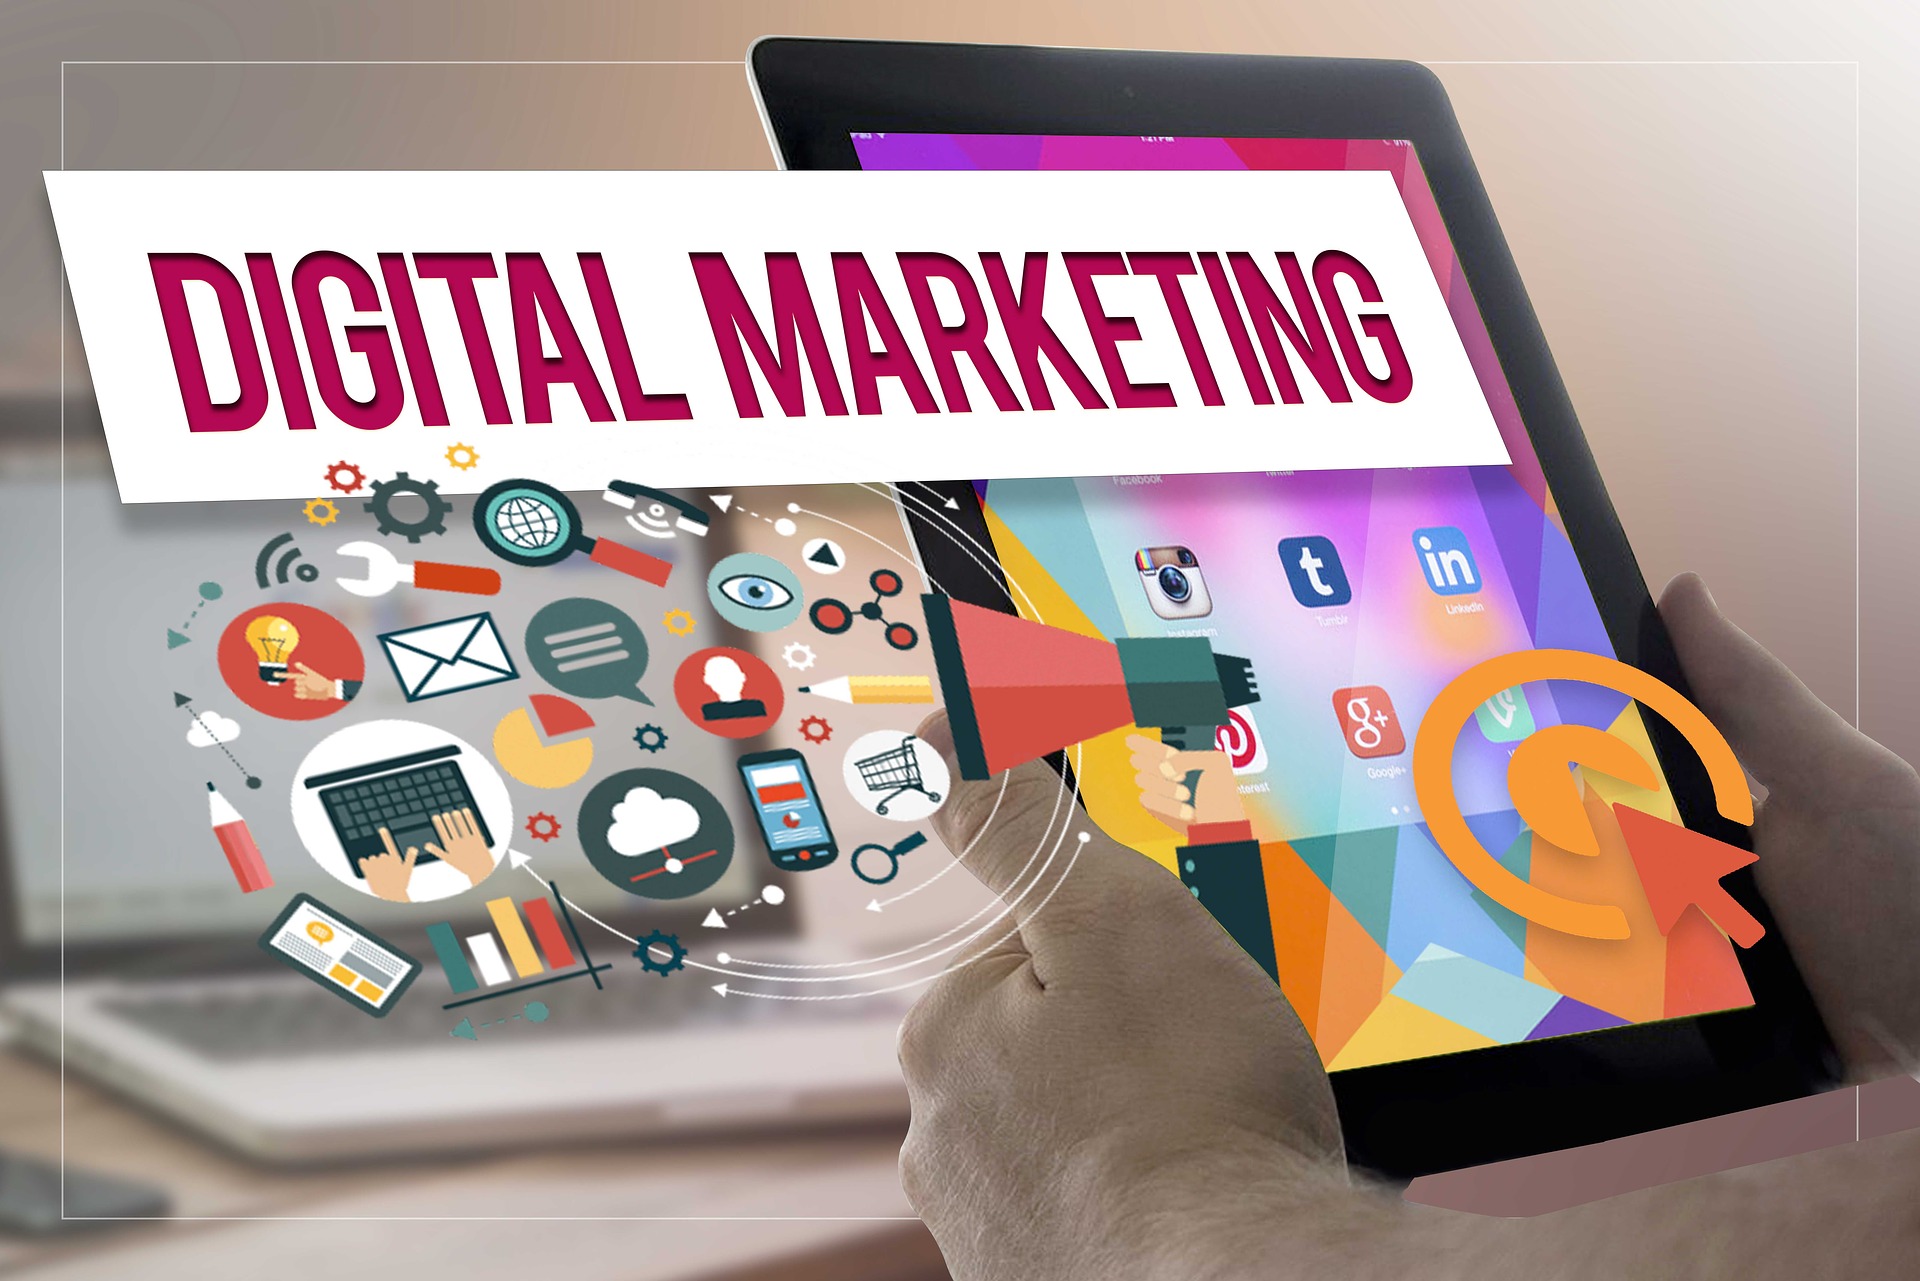 Digital Marketing - Real Online Jobs For Making Quick Money - 